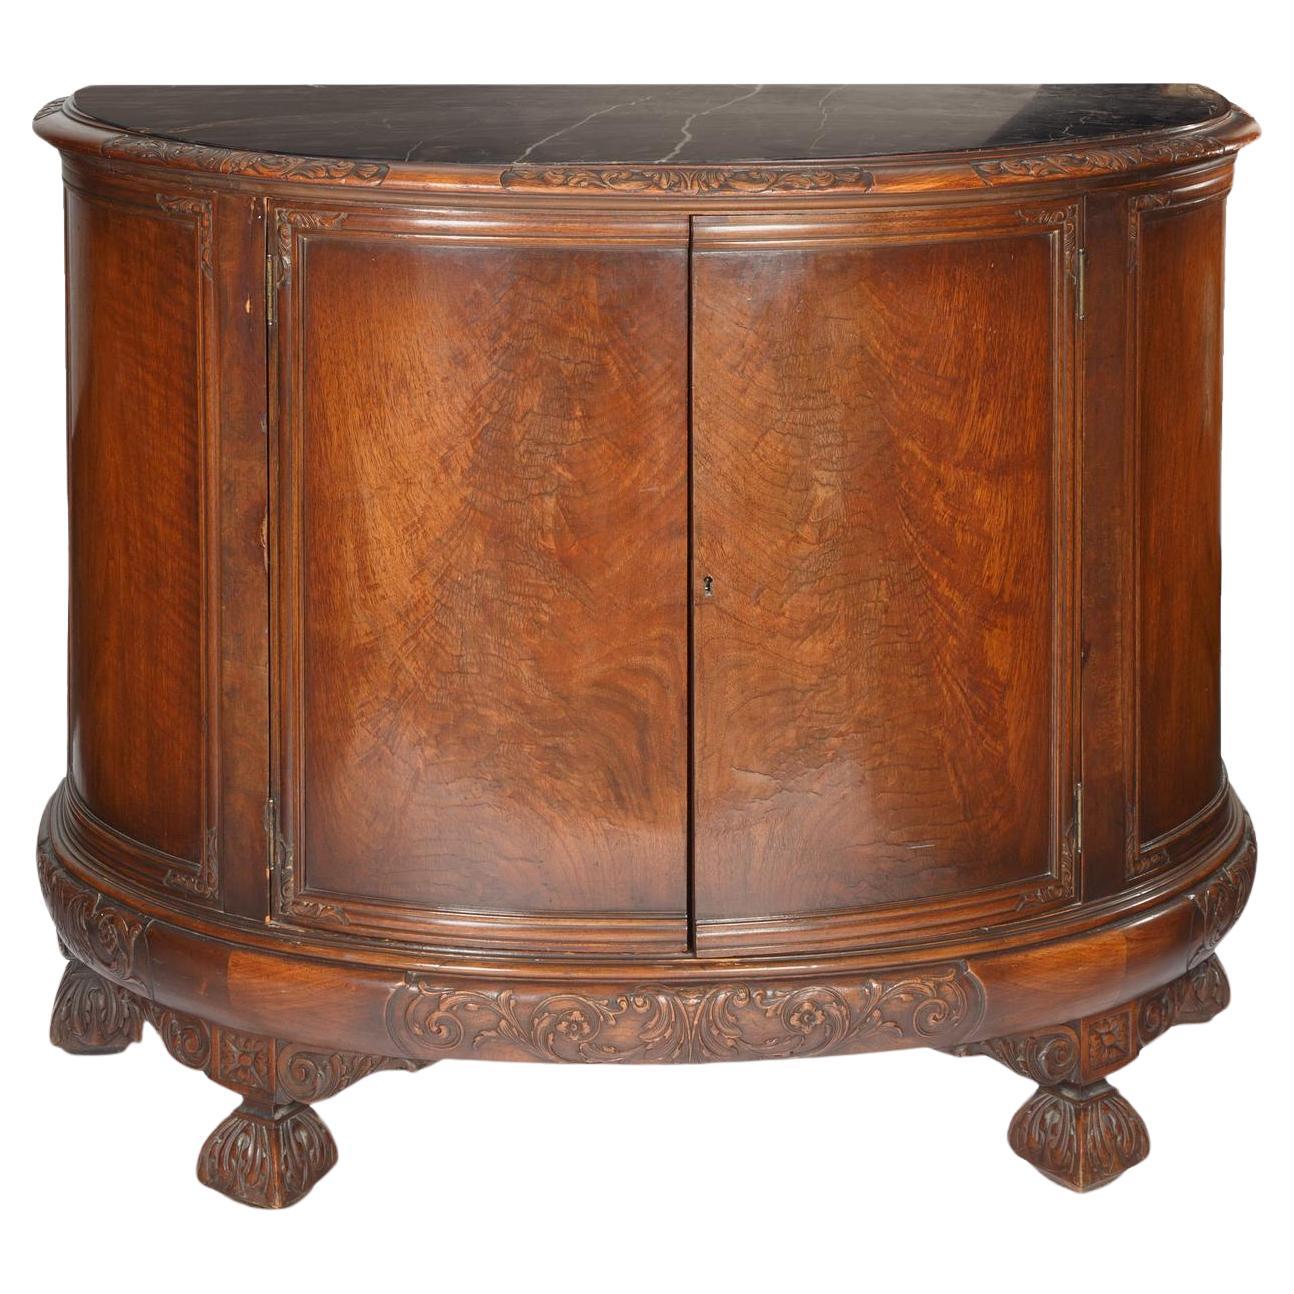 French Mahogany Wood Demilune Shape Marble Inserted Top Sideboard / Server